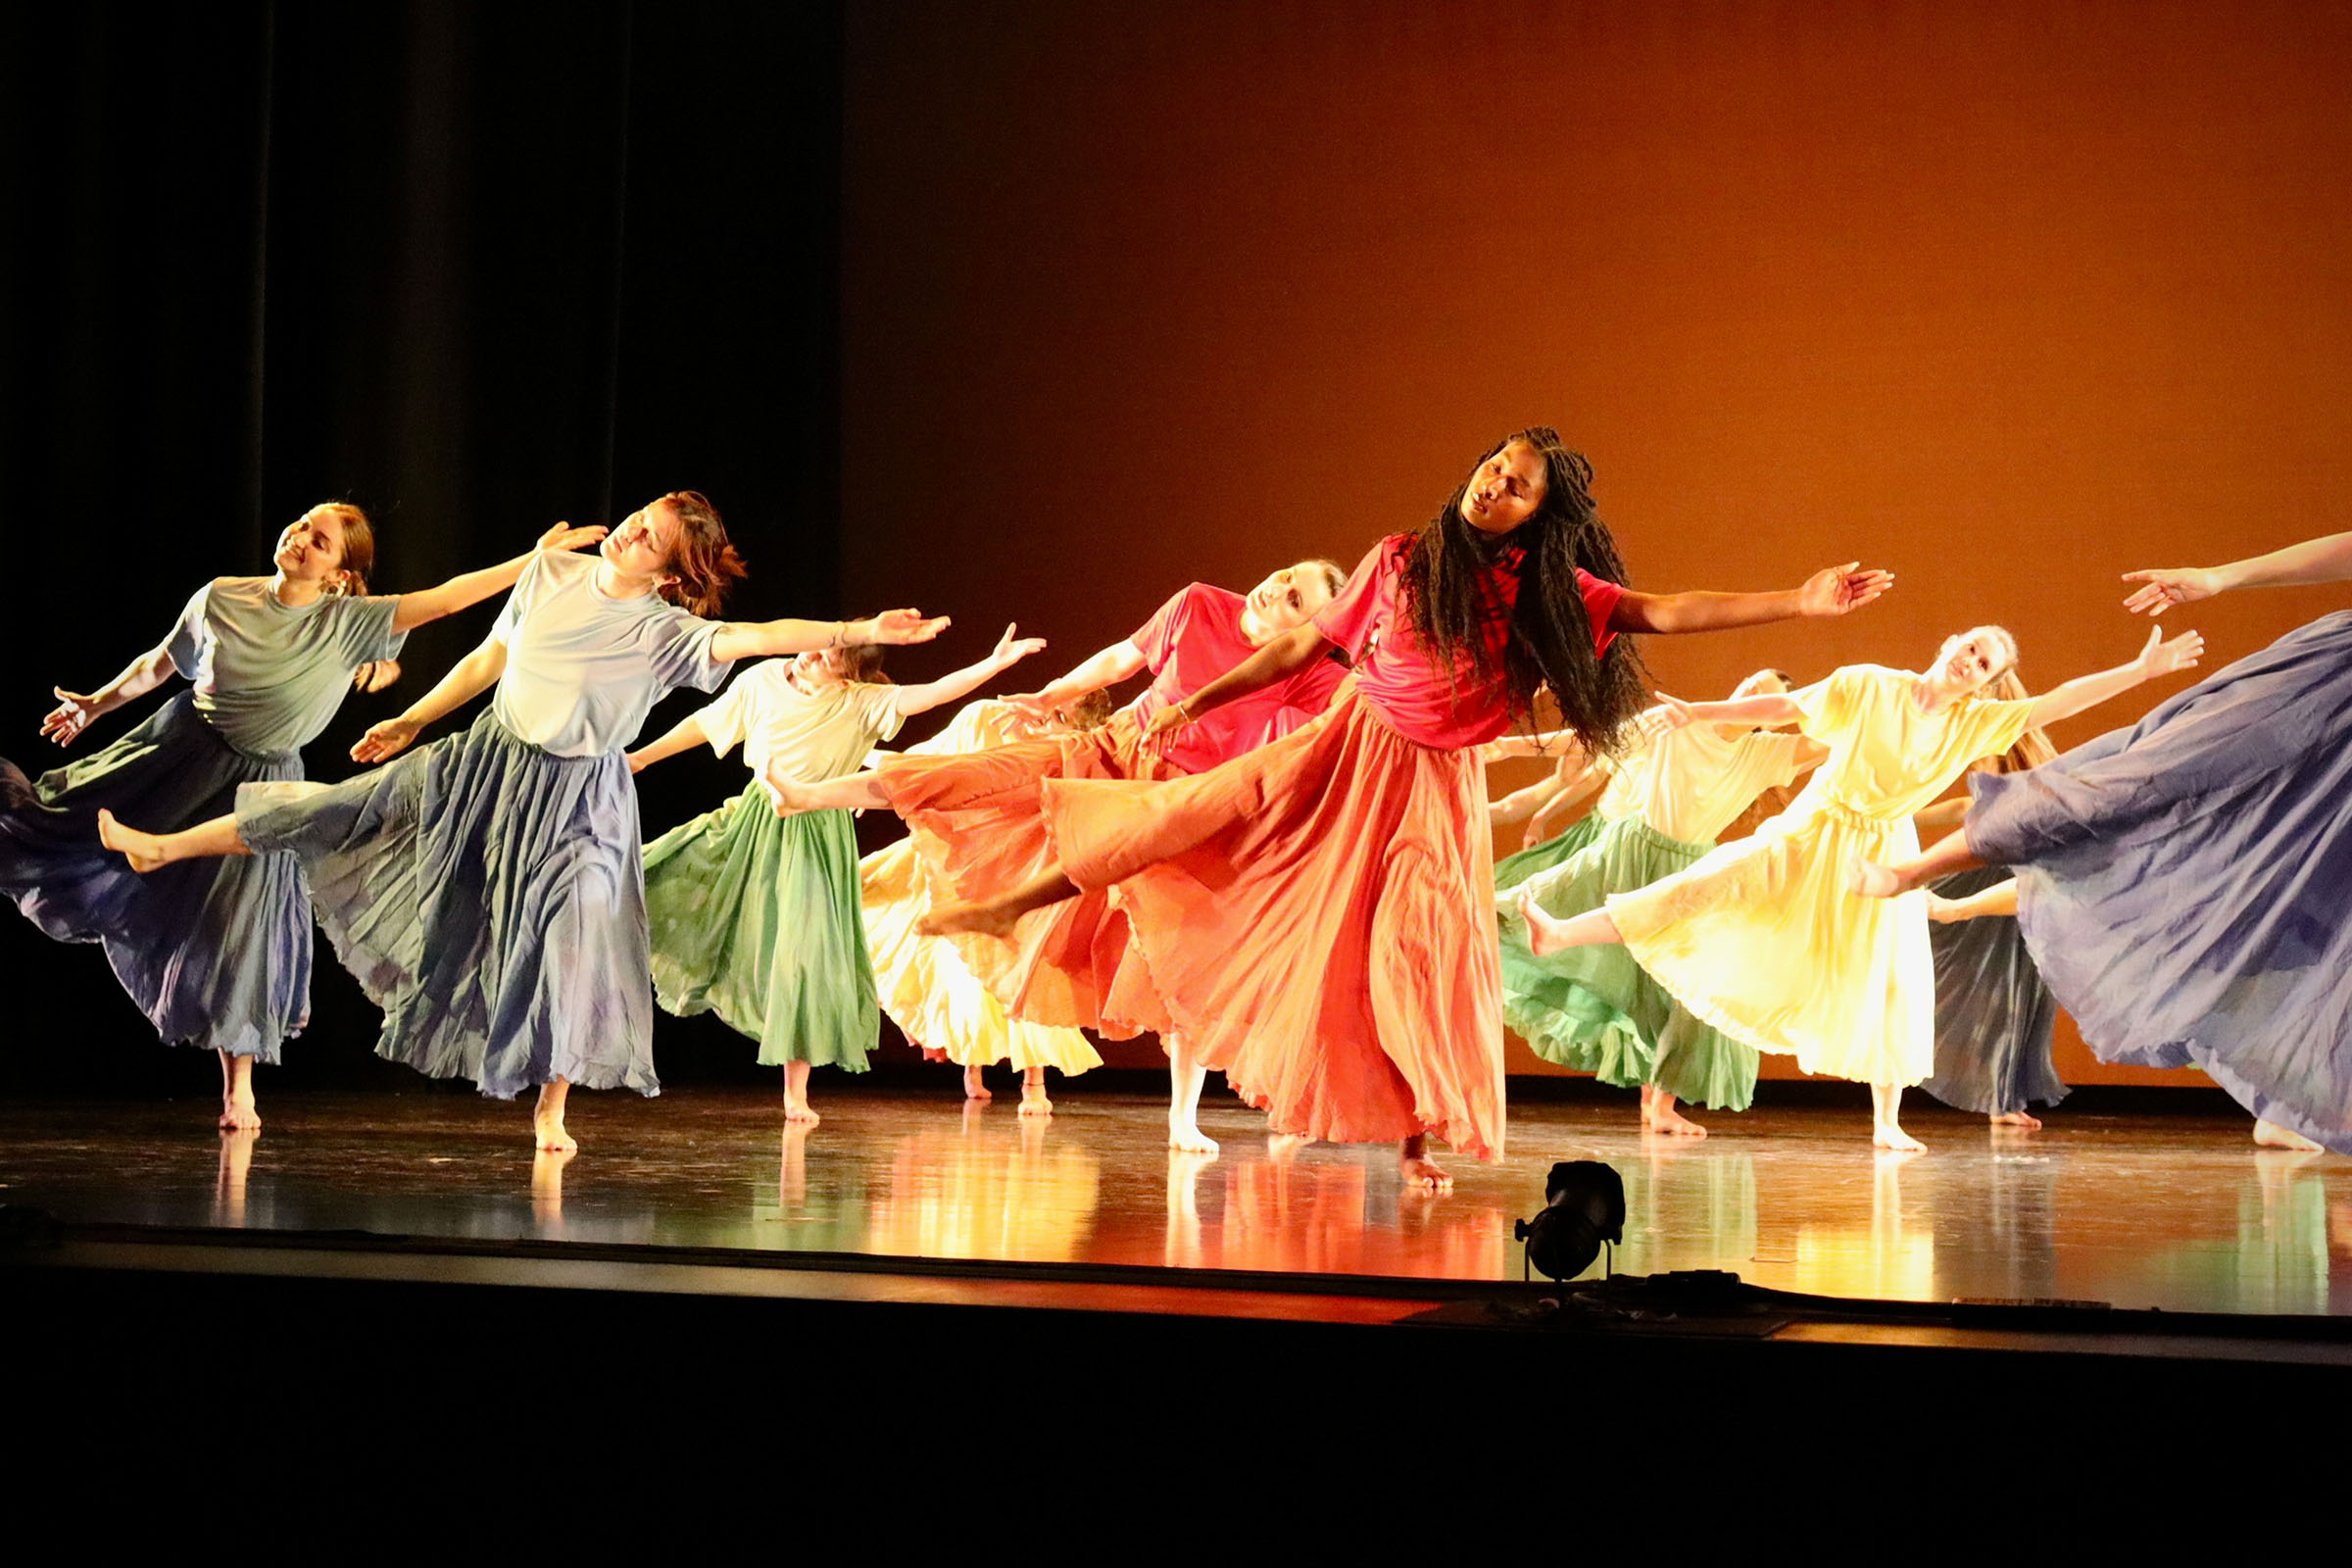 A large group of people dancing on a stage. They are all wearing different color dresses while leaning over on one leg with their arms out straight in unison.